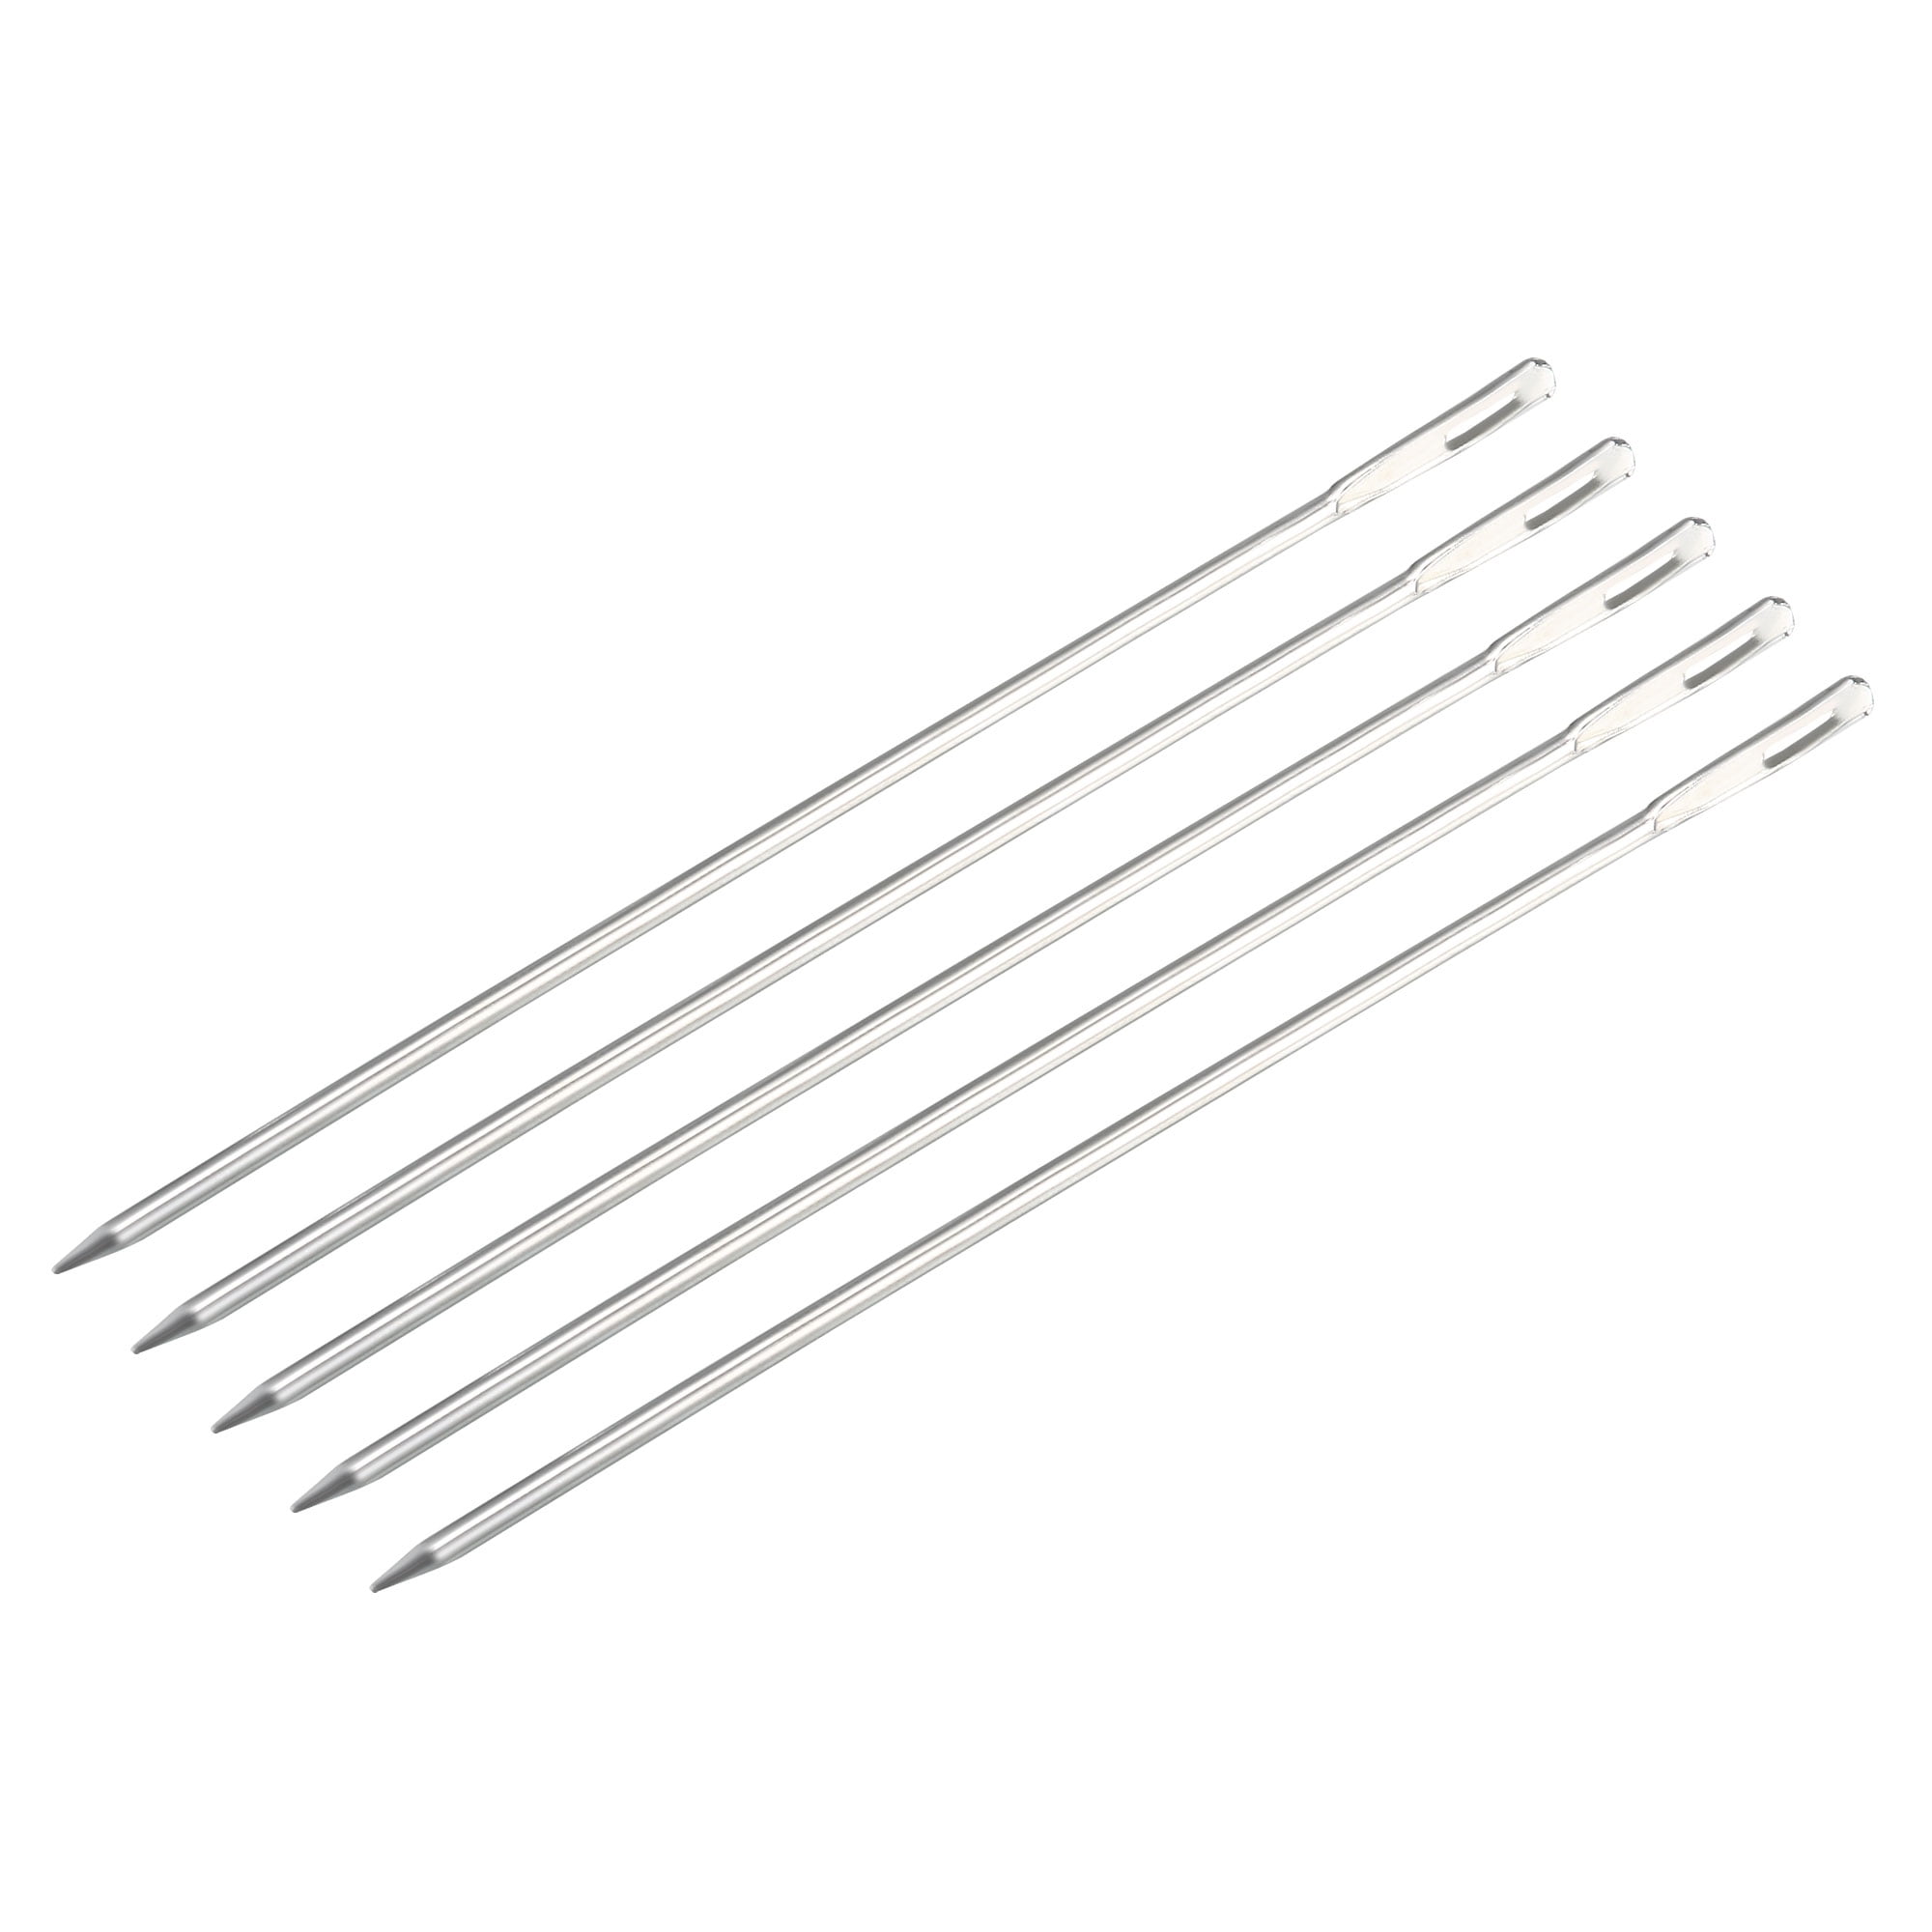 Uxcell Metal Sewing Needles for Canvas 5 Pack 5.7 Length